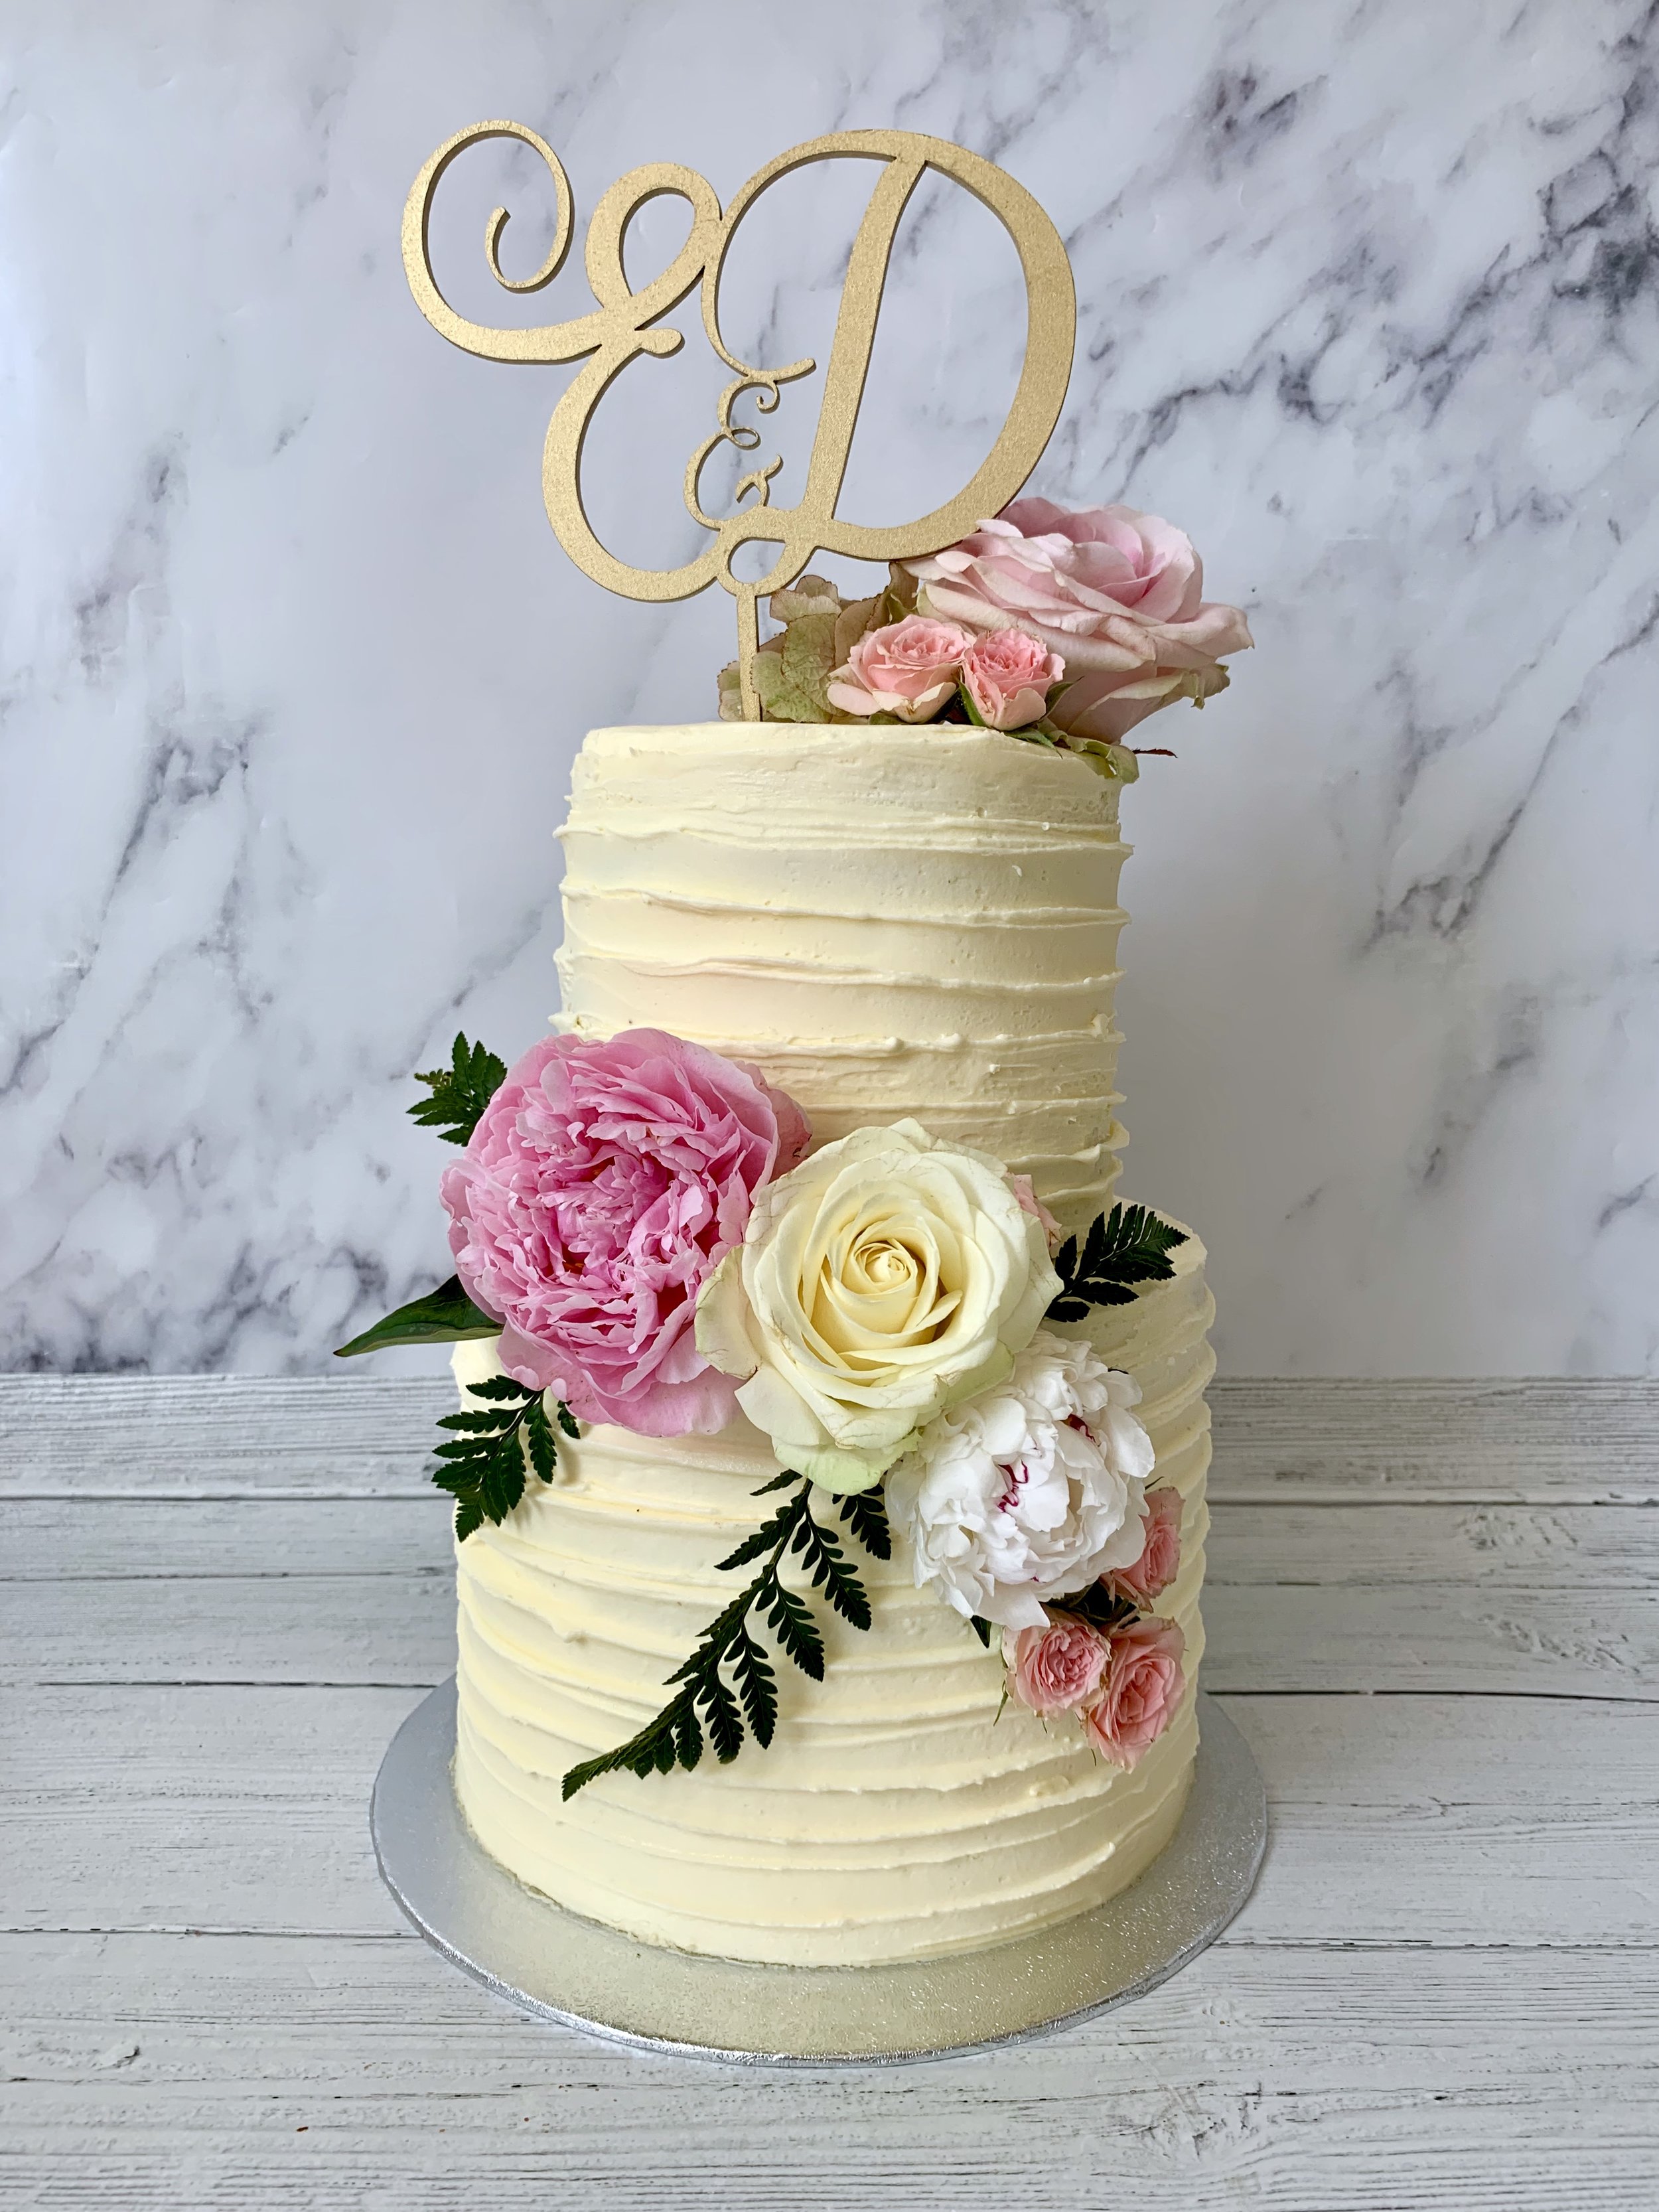 Simple two-tiered wedding cake recipe - BBC Food